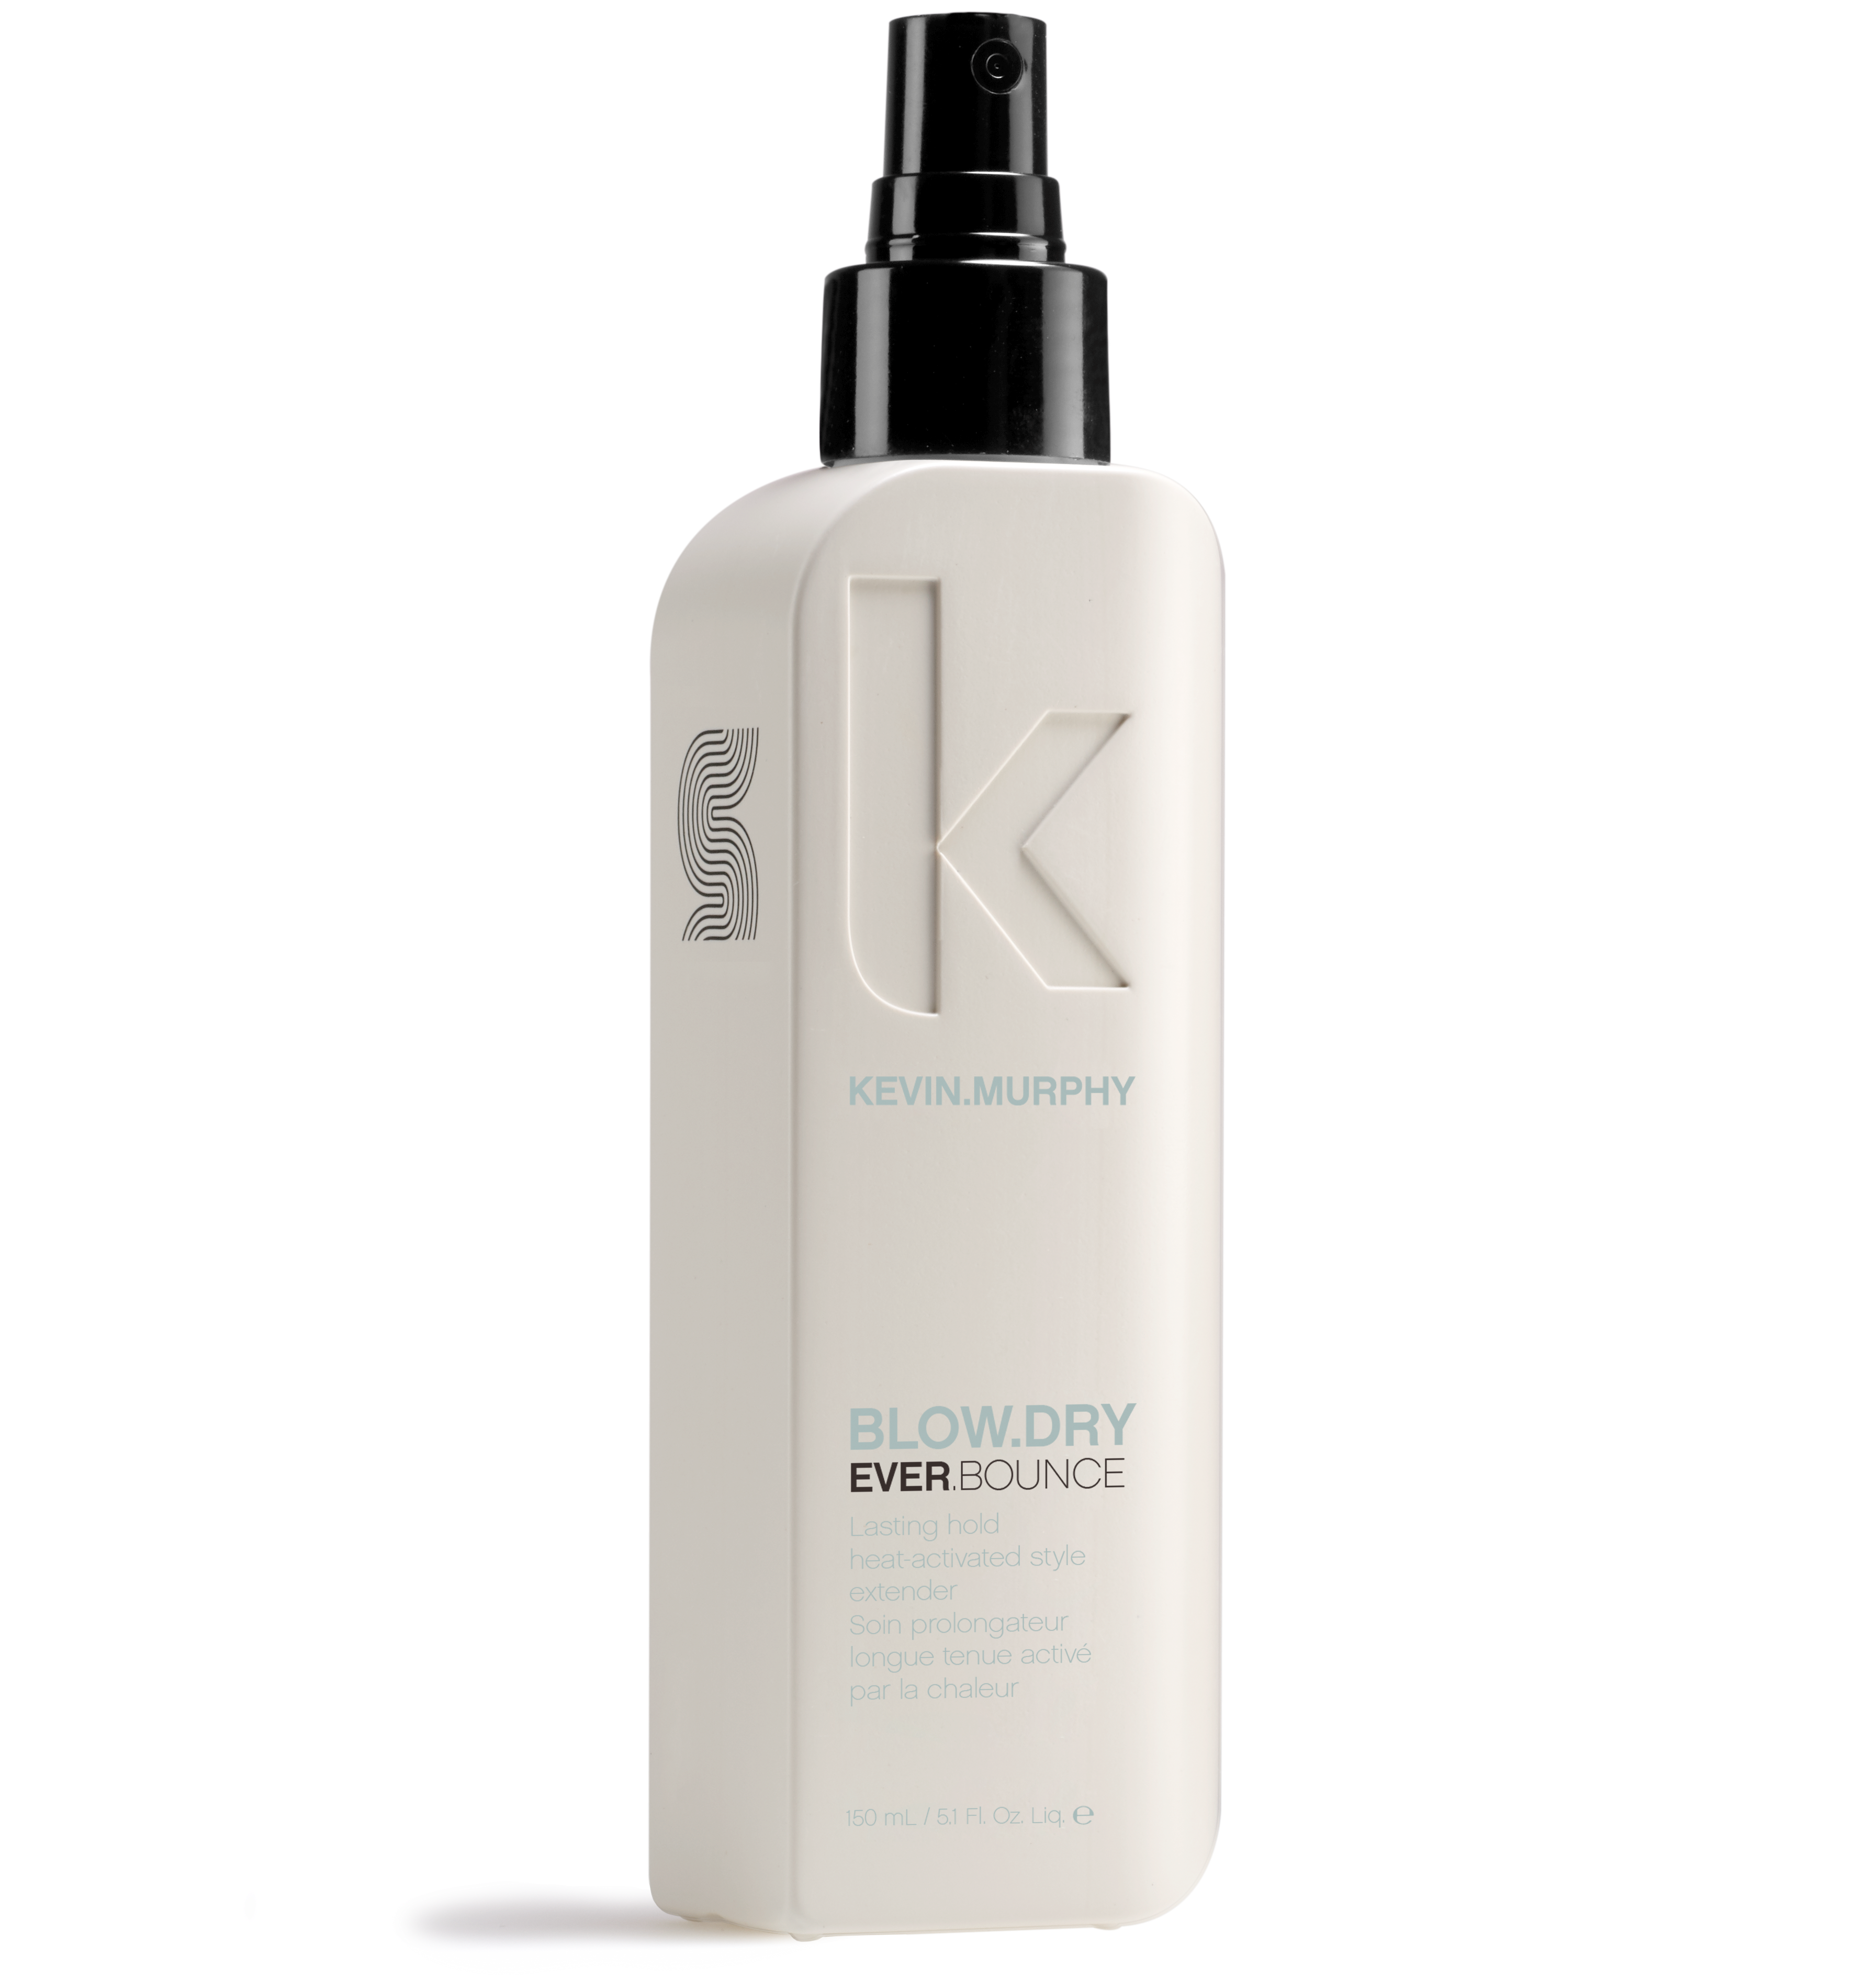 EVER BOUNCE KEVIN MURPHY SECADO BLOW DRY